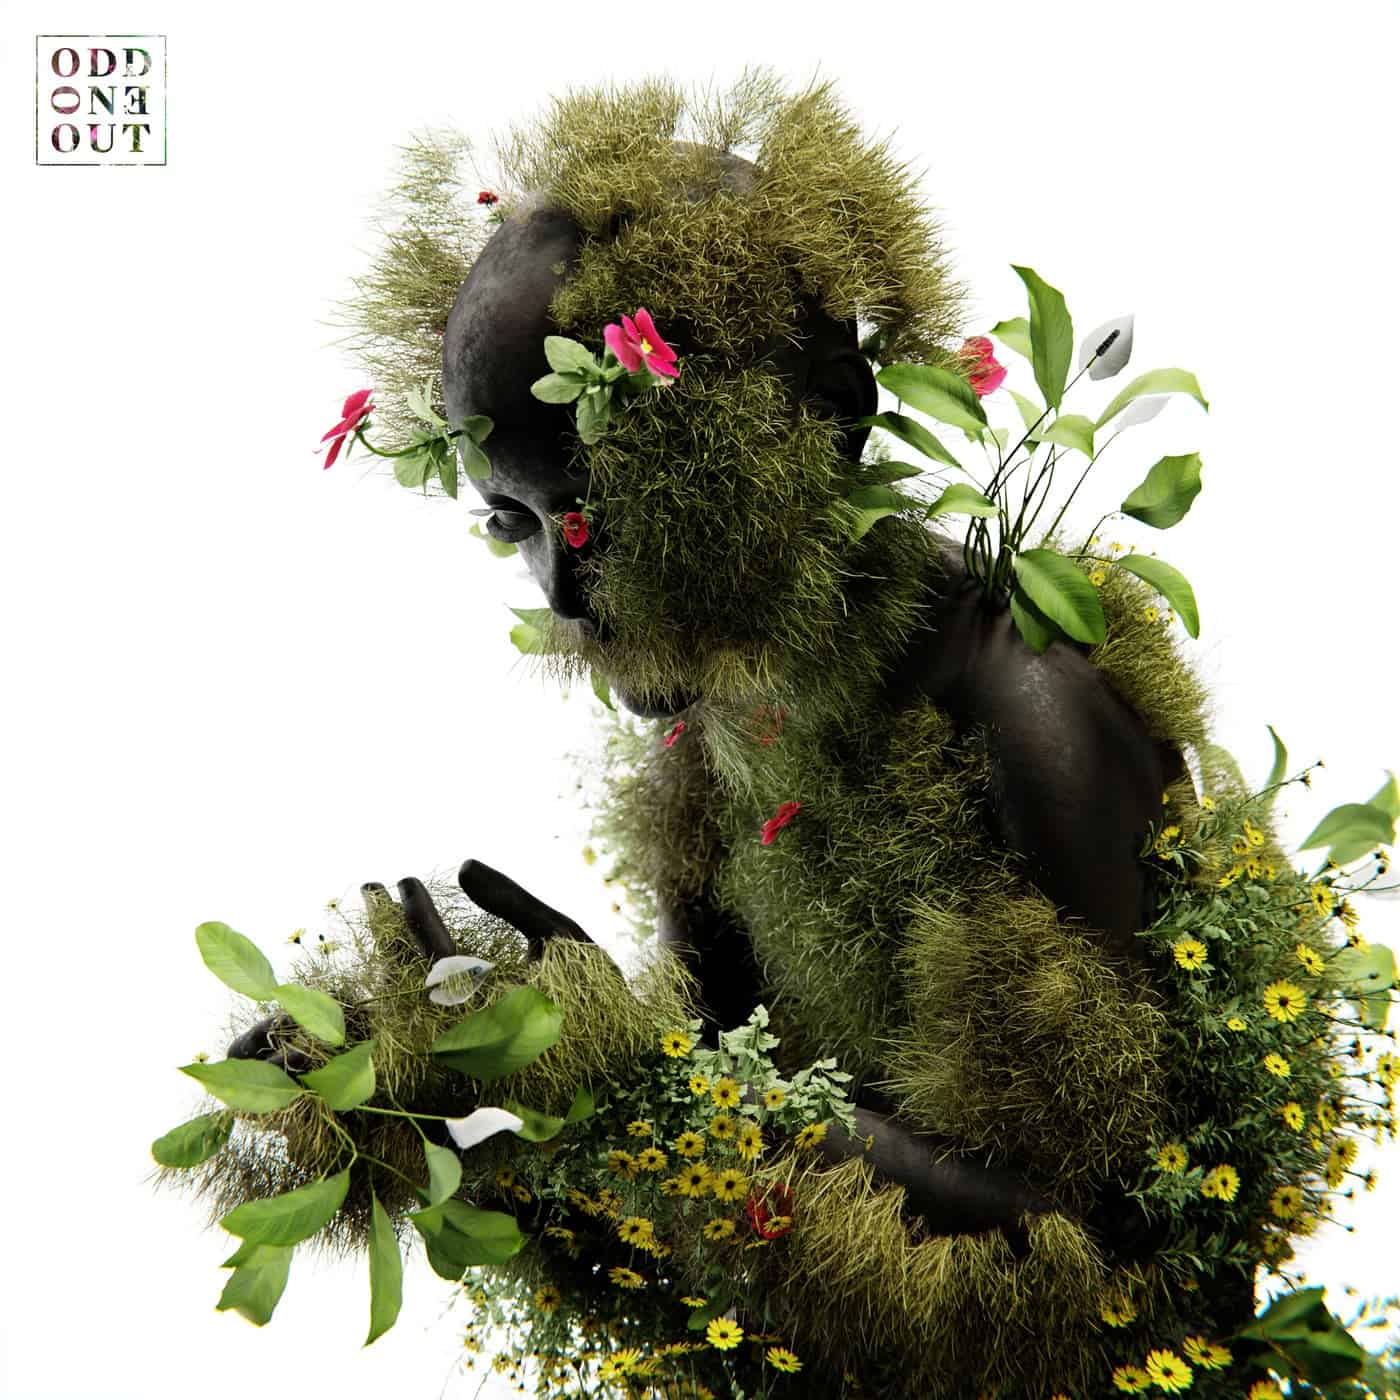 image cover: Yotto, SØNIN, AunA - Let You Go - Joris Voorn Extended Remix on Odd One Out